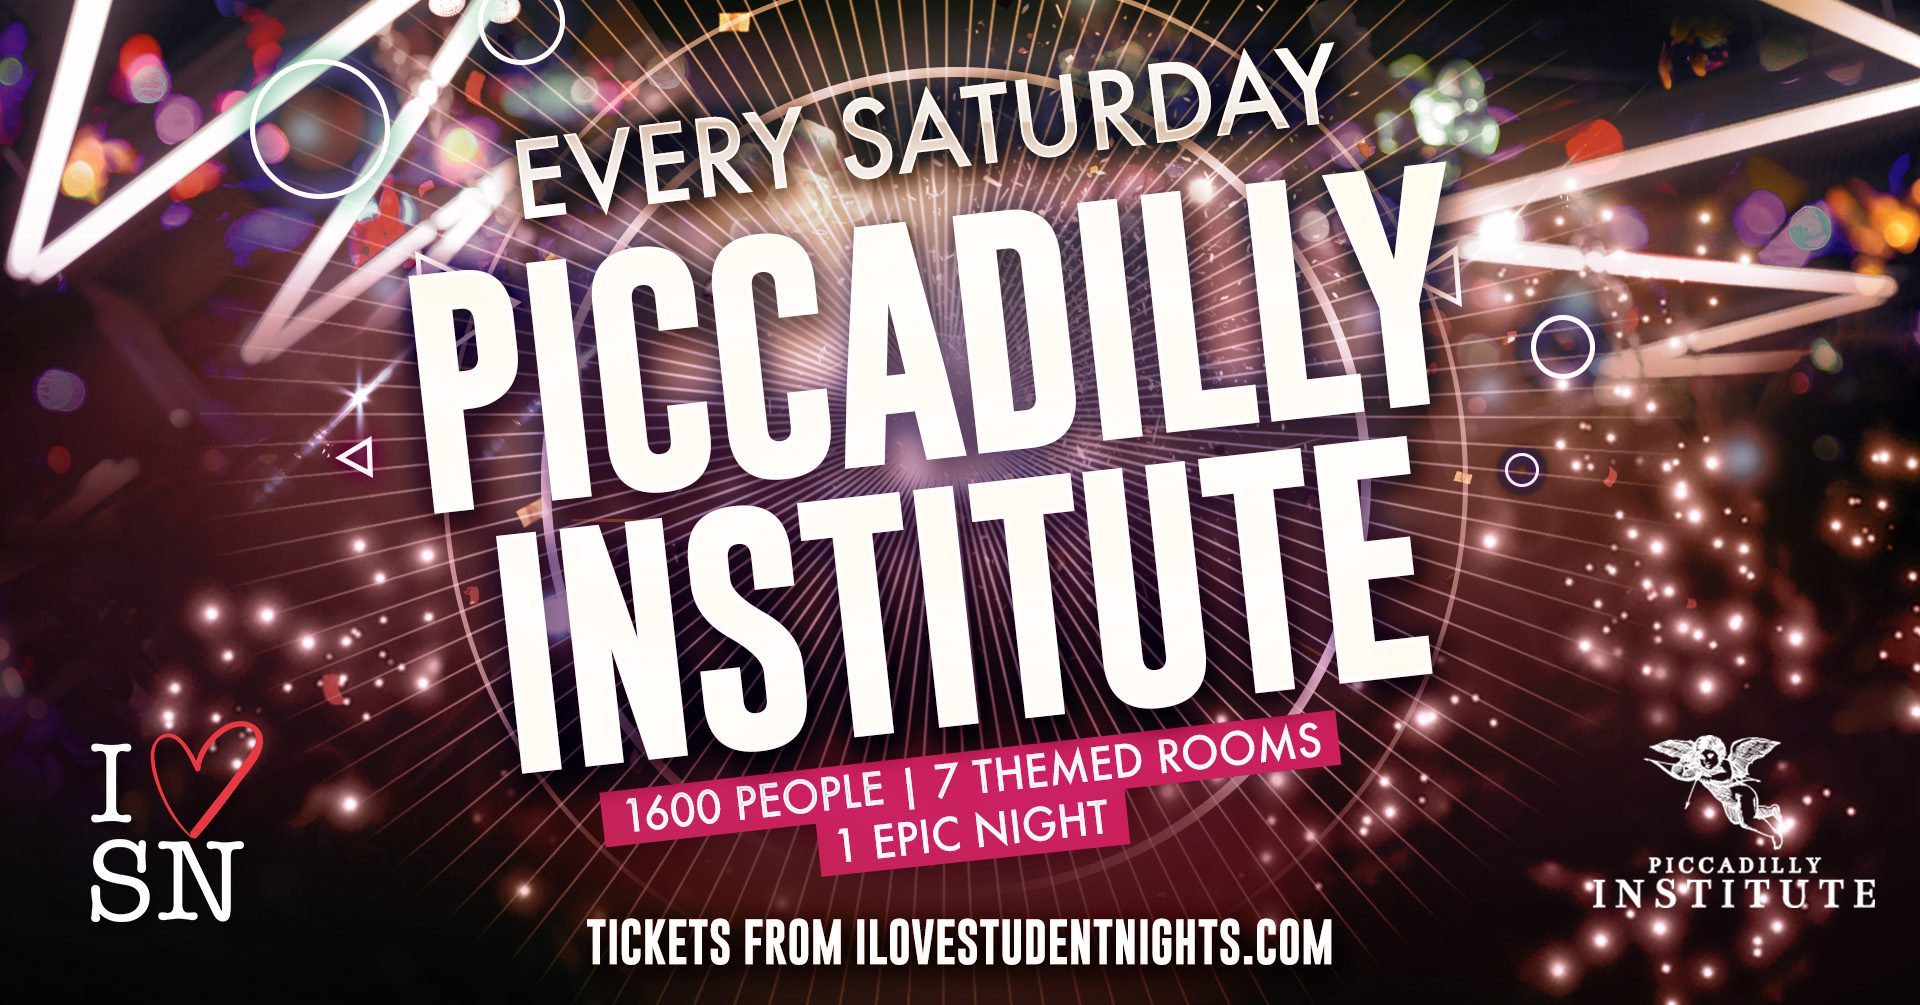 Piccadilly Institute Saturday Tickets